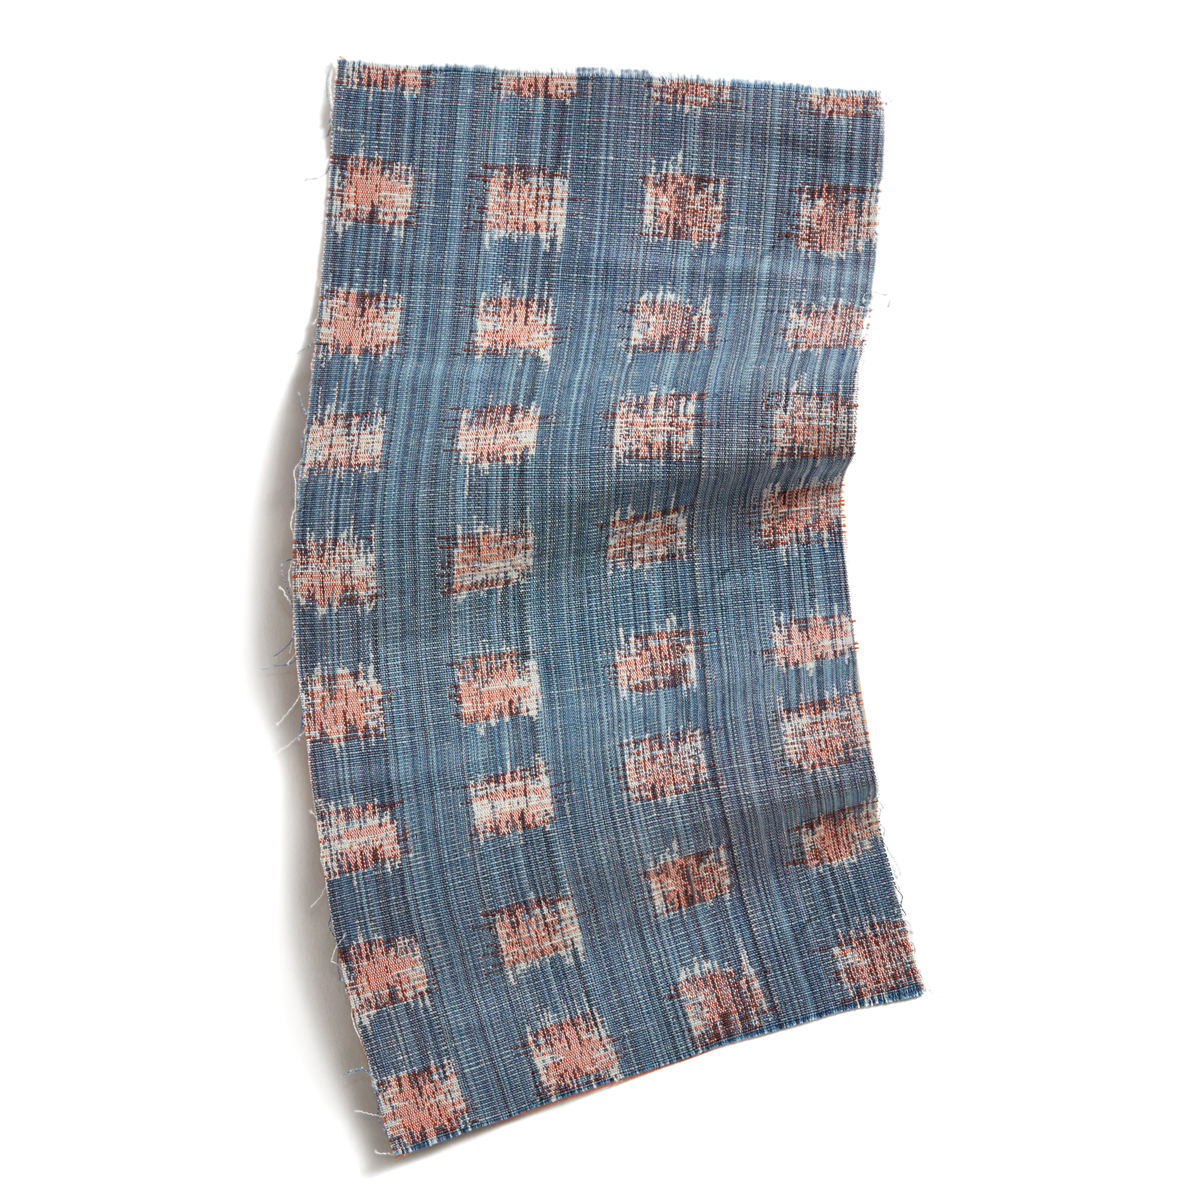 Gridded Ikat Fabric in Blue Pink